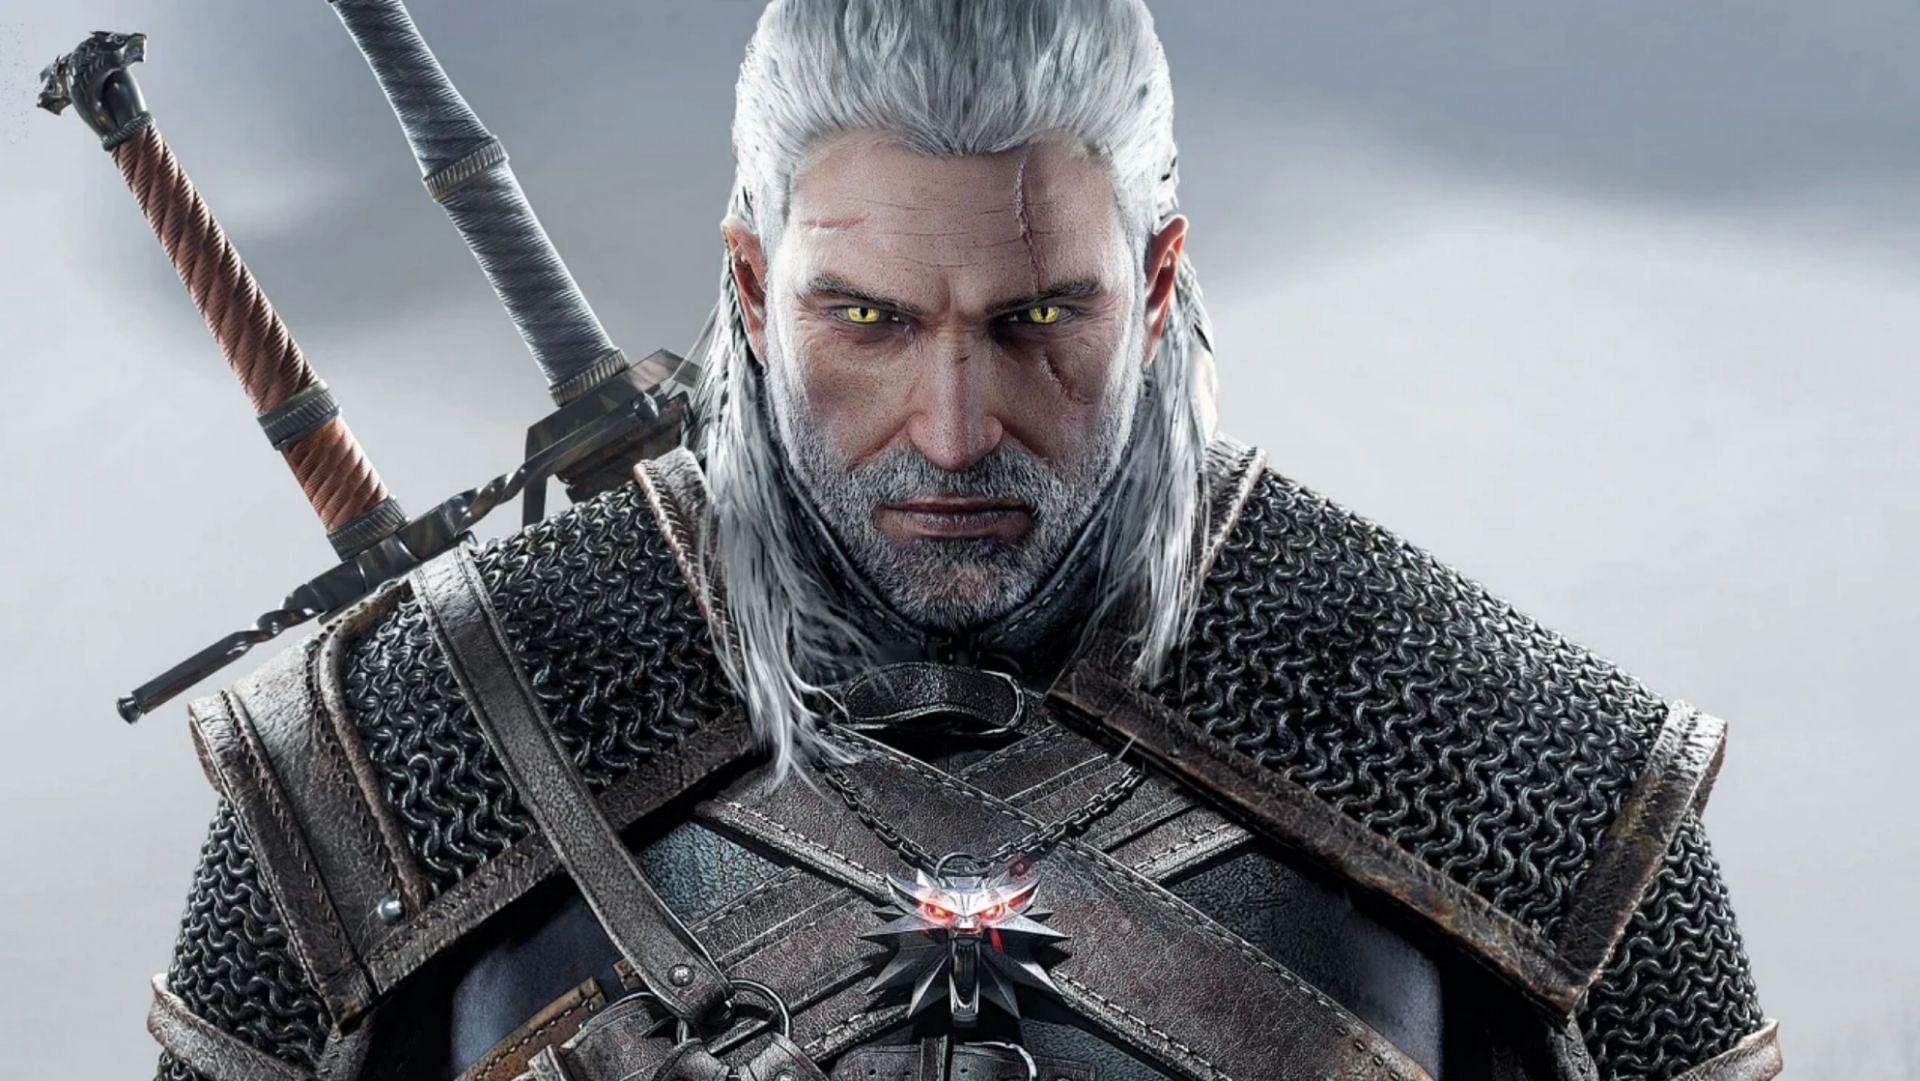 With a great deal of Witcher to come in the future, CD Projekt Red